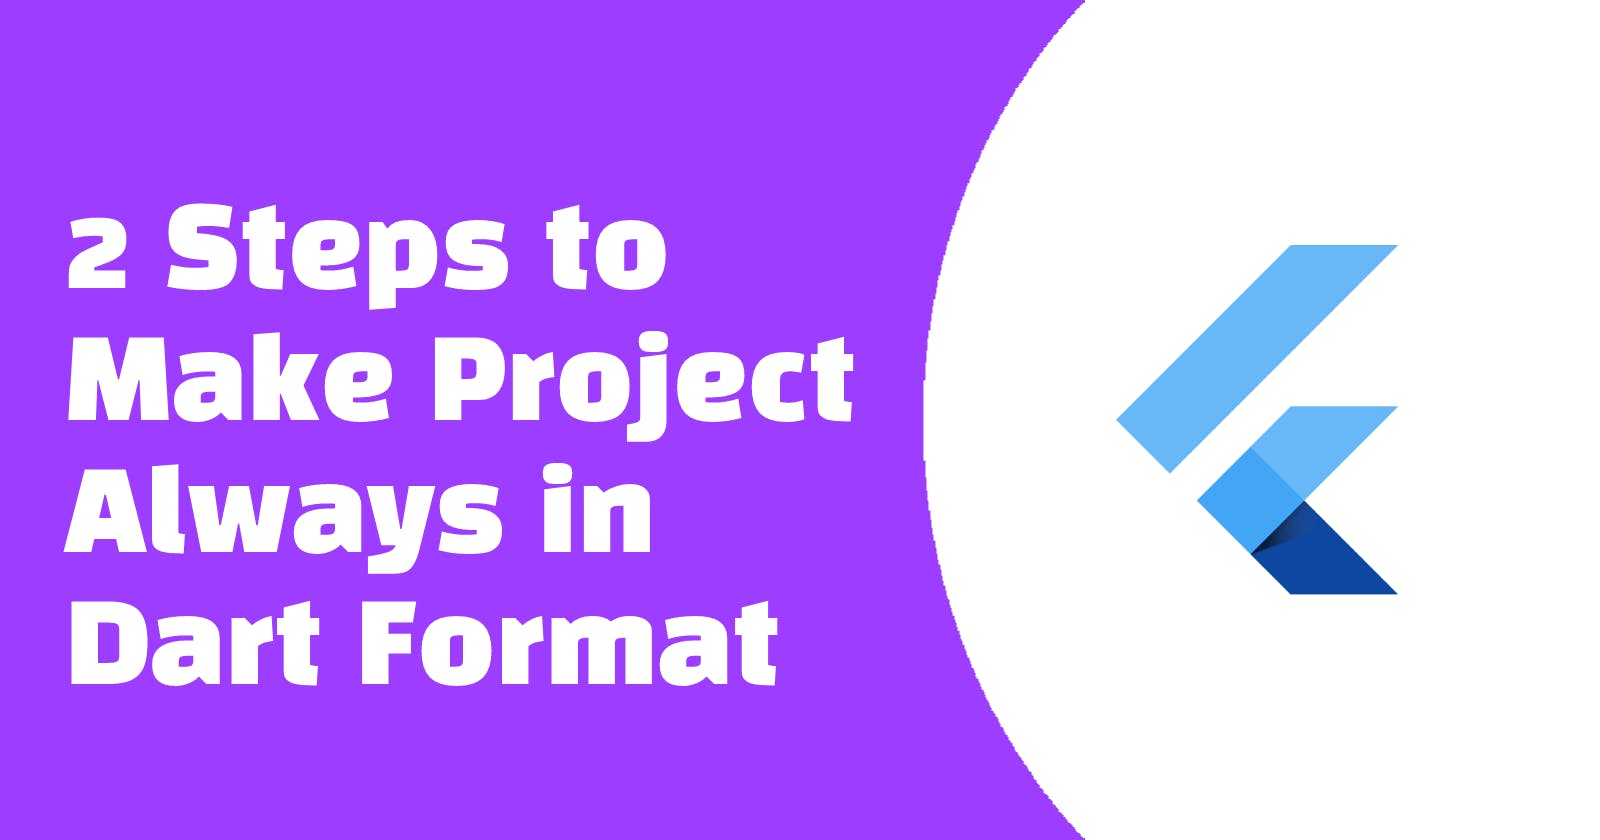 2 Steps to Make Project Always in Dart Format